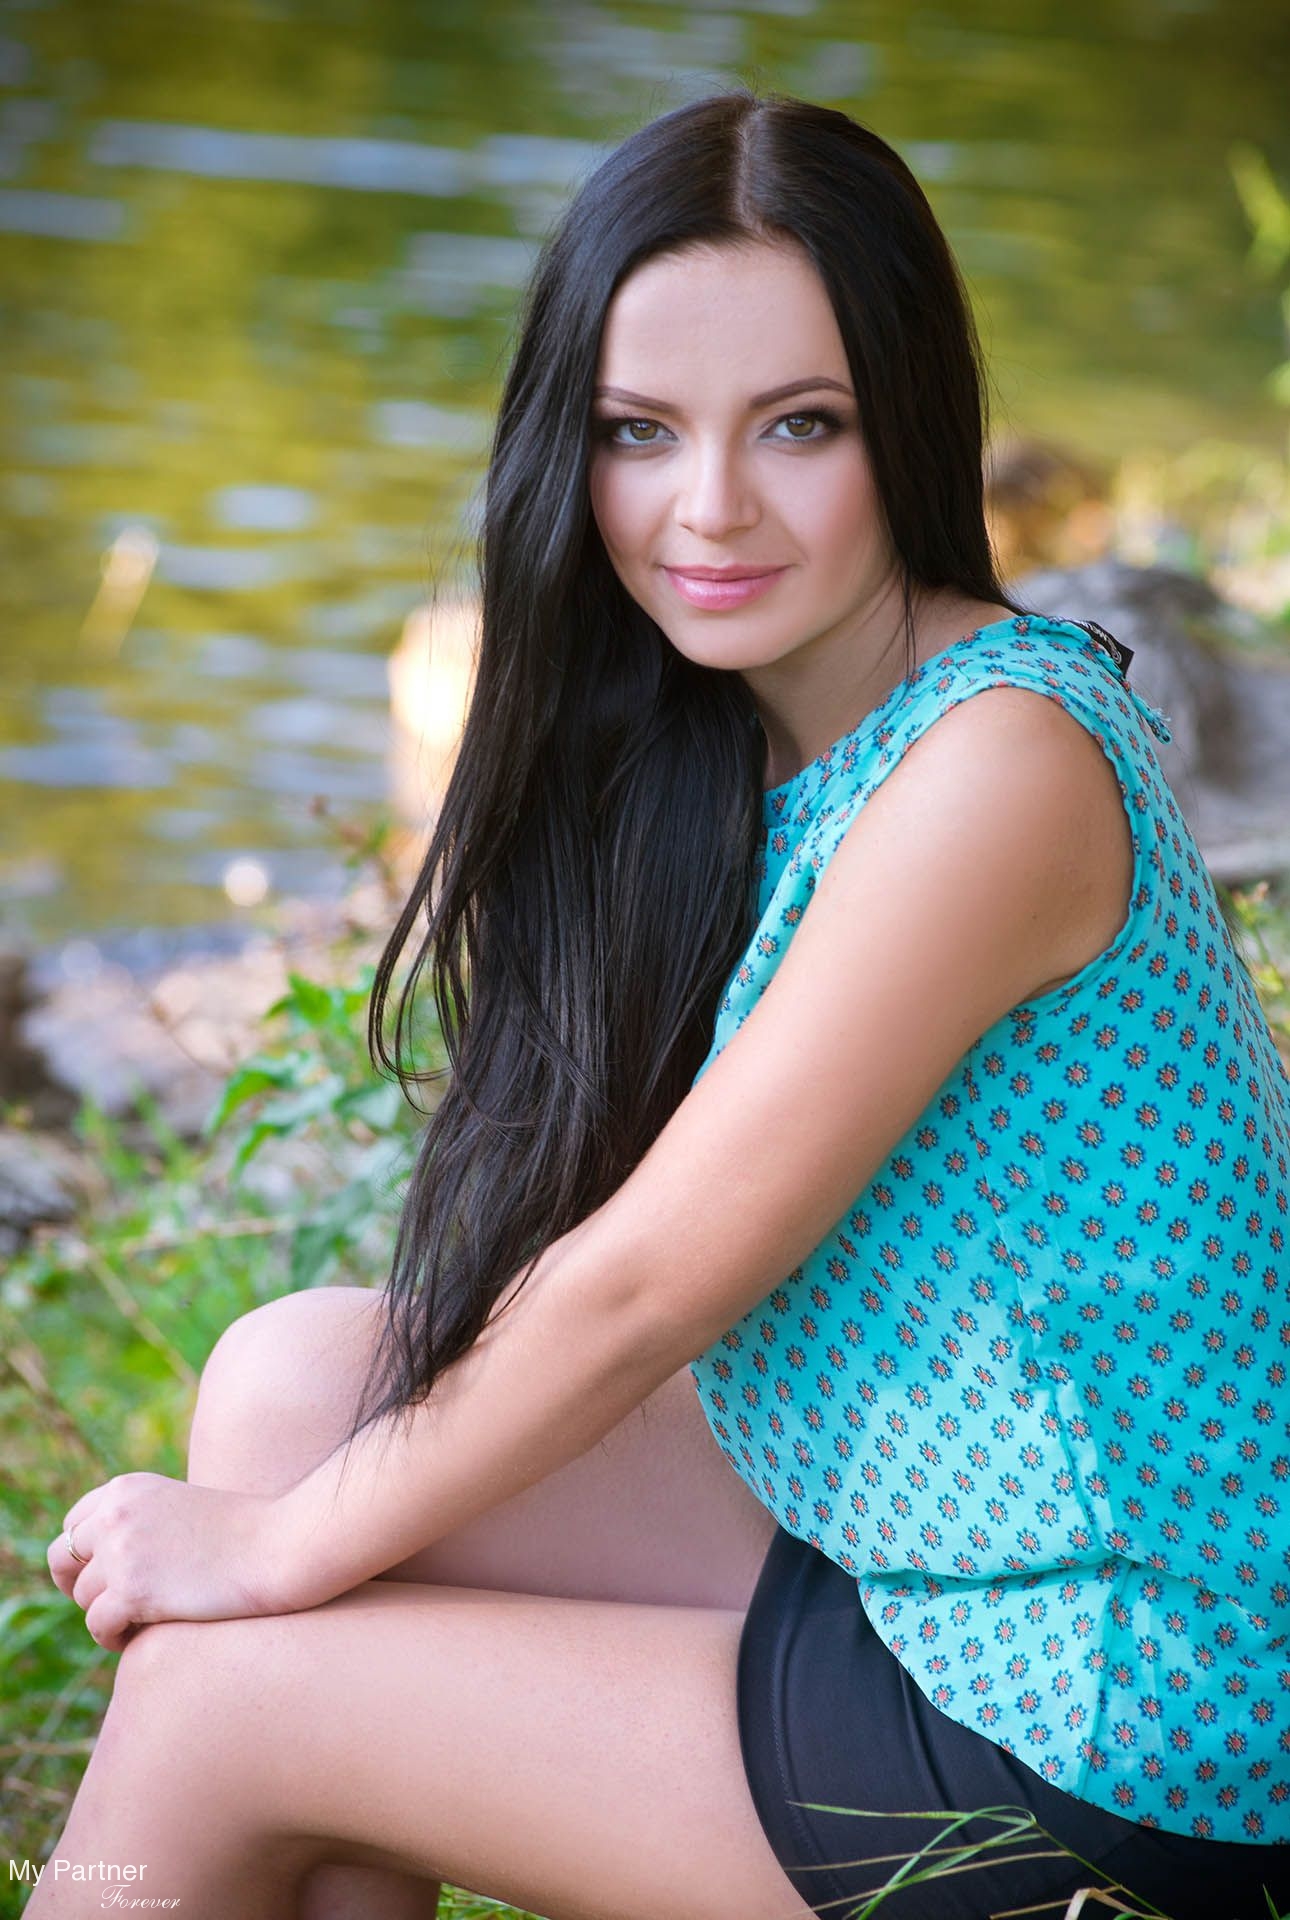 Bride From Ukraine Zaporozhye Gay And Sex